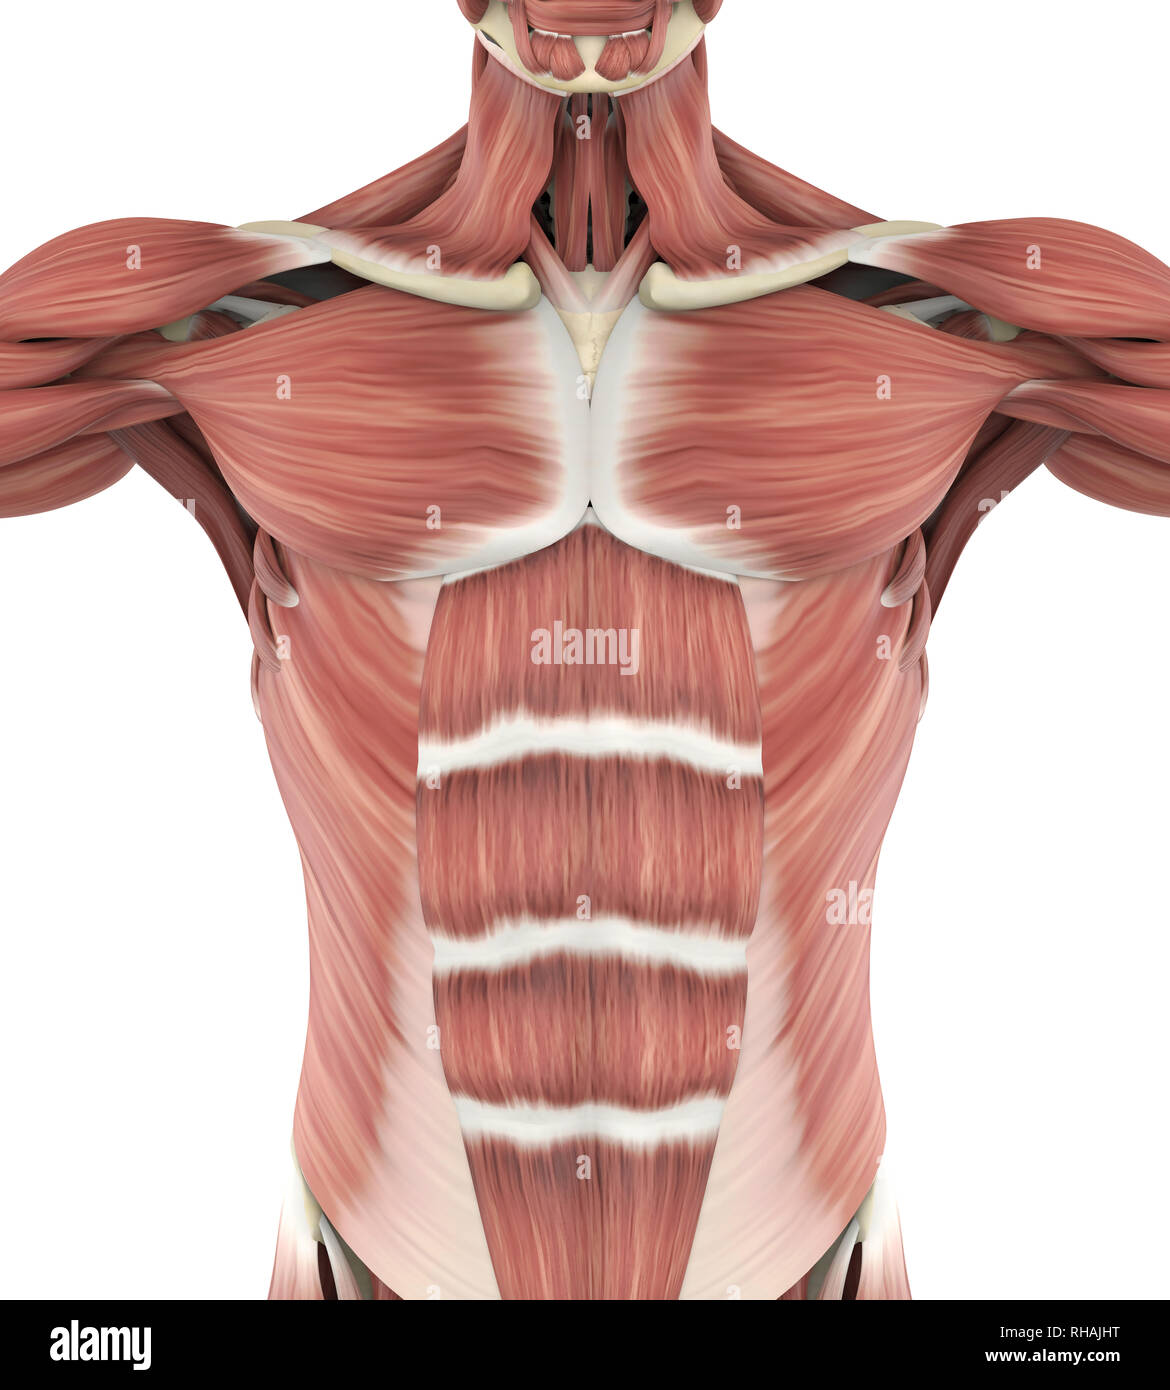 Male Chest Muscles Diagram Developing Those Chest Muscles